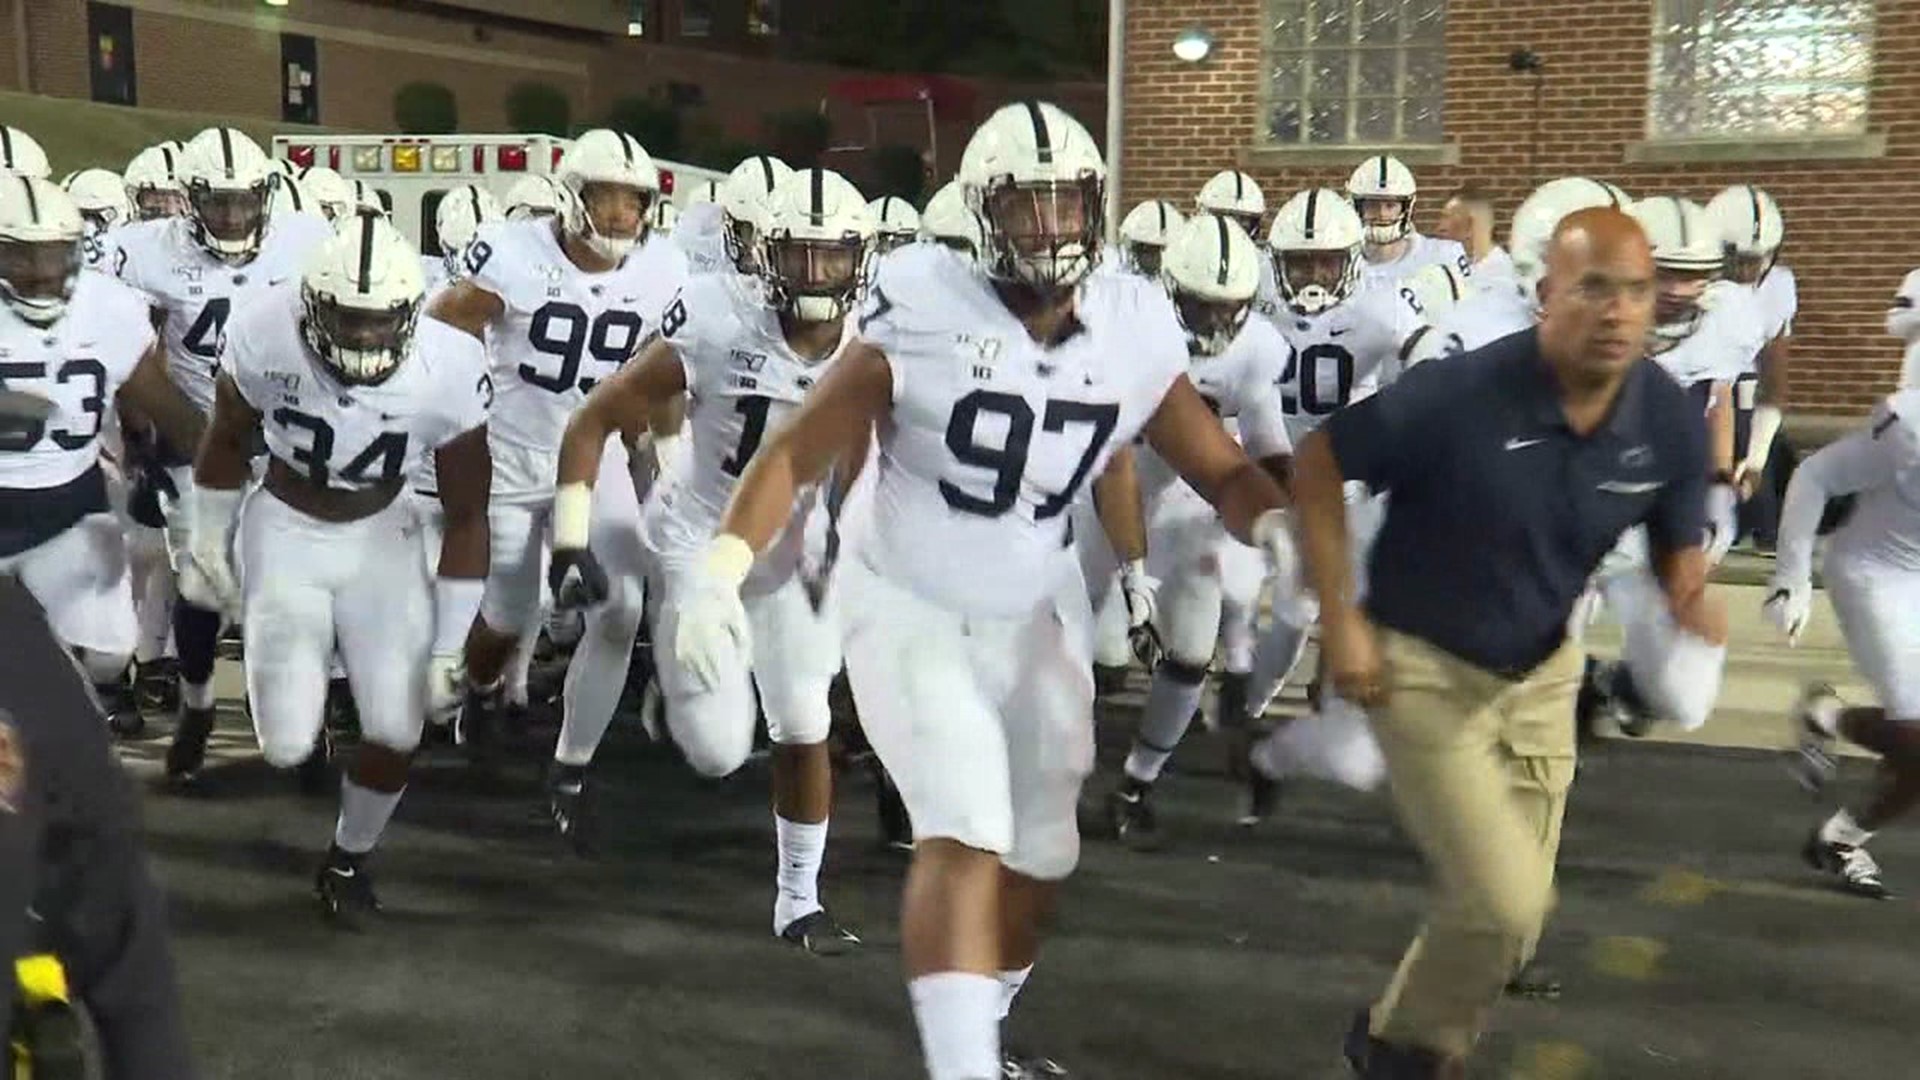 Penn State football is back. The Big Ten announced Wednesday that the conference is just five weeks away from kicking off their fall football season.